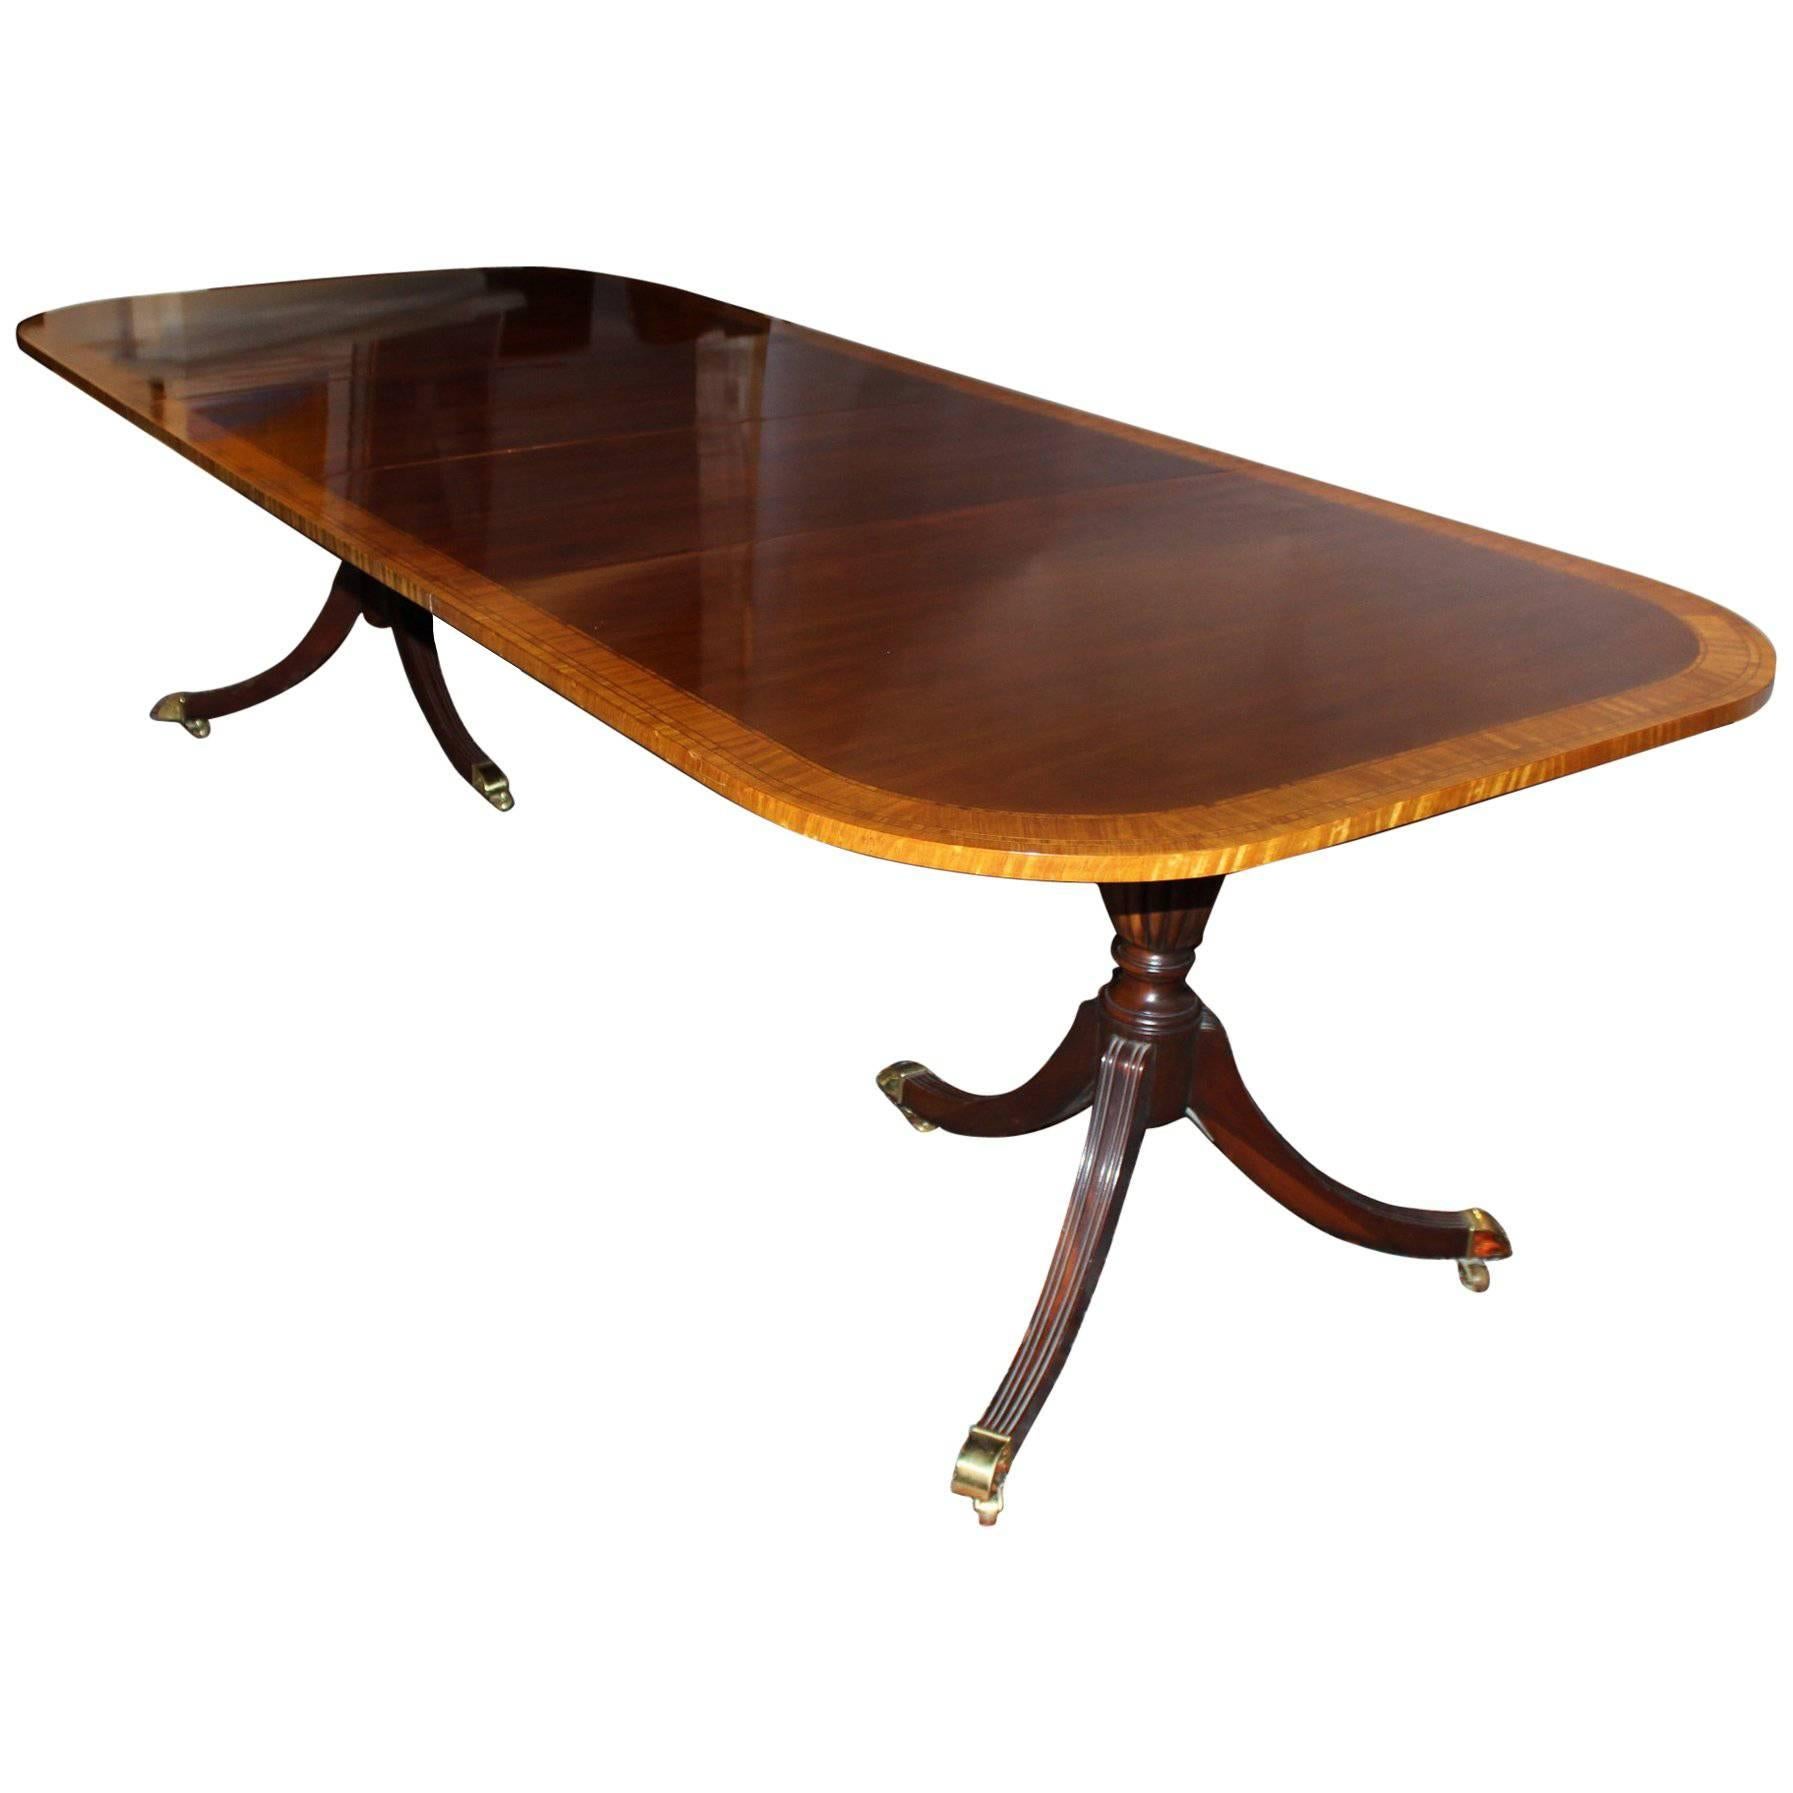 Splendid Double Banded Mahogany and Satinwood Double Pedestal Dining Table